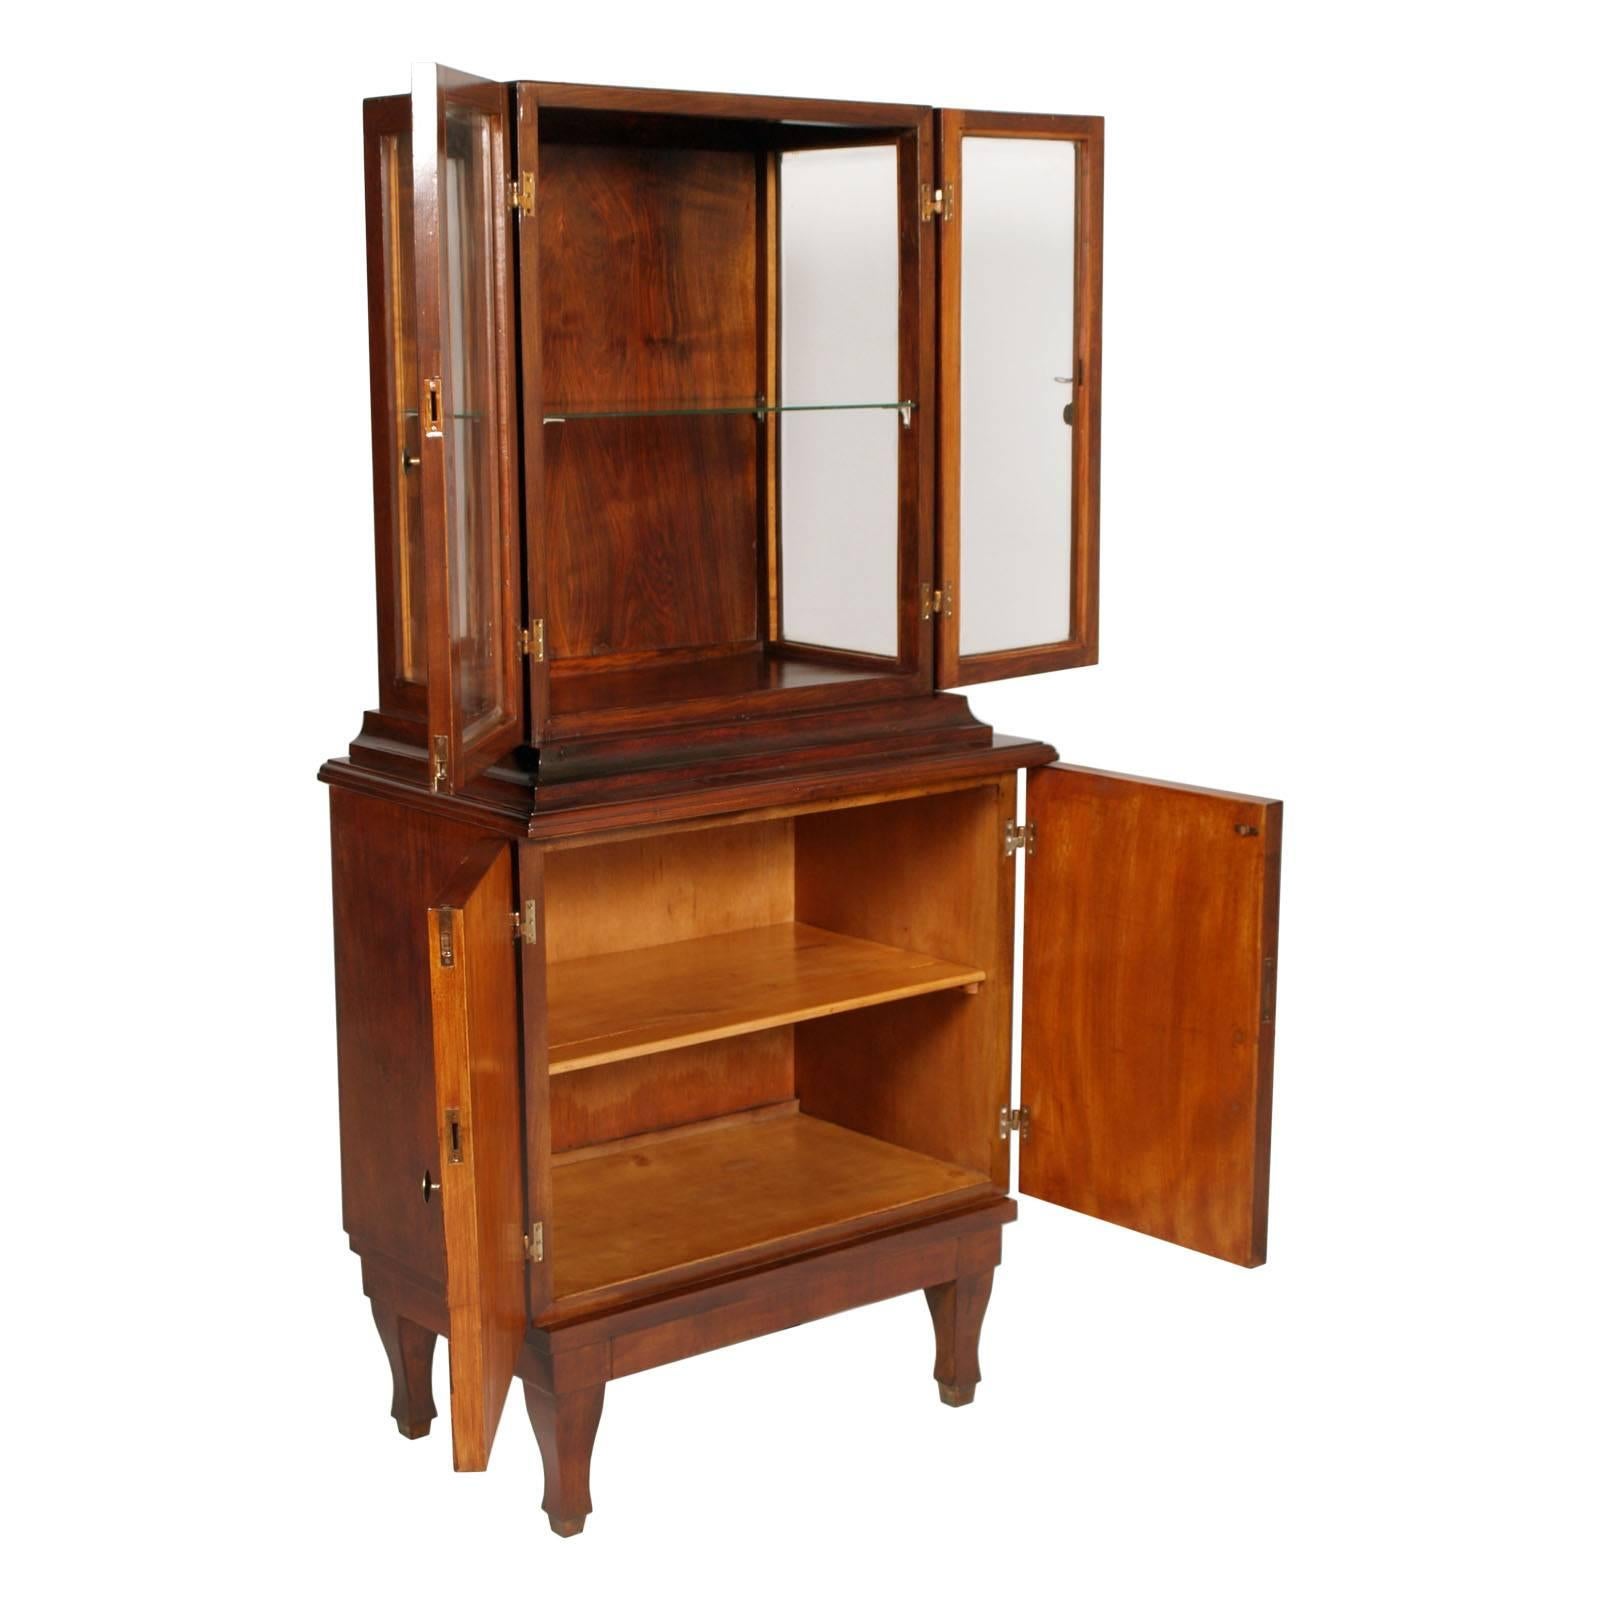 Italy Art Deco elegant and charming credenza display cabinet  by Cantù in walnut and walnut veneer,  Paolo Buffa attributed. Beveled crystals and brass accessories
Measures cm: H 93 add 83 W 85 D 50/40 
Internal shelves display H 35cm
Internal